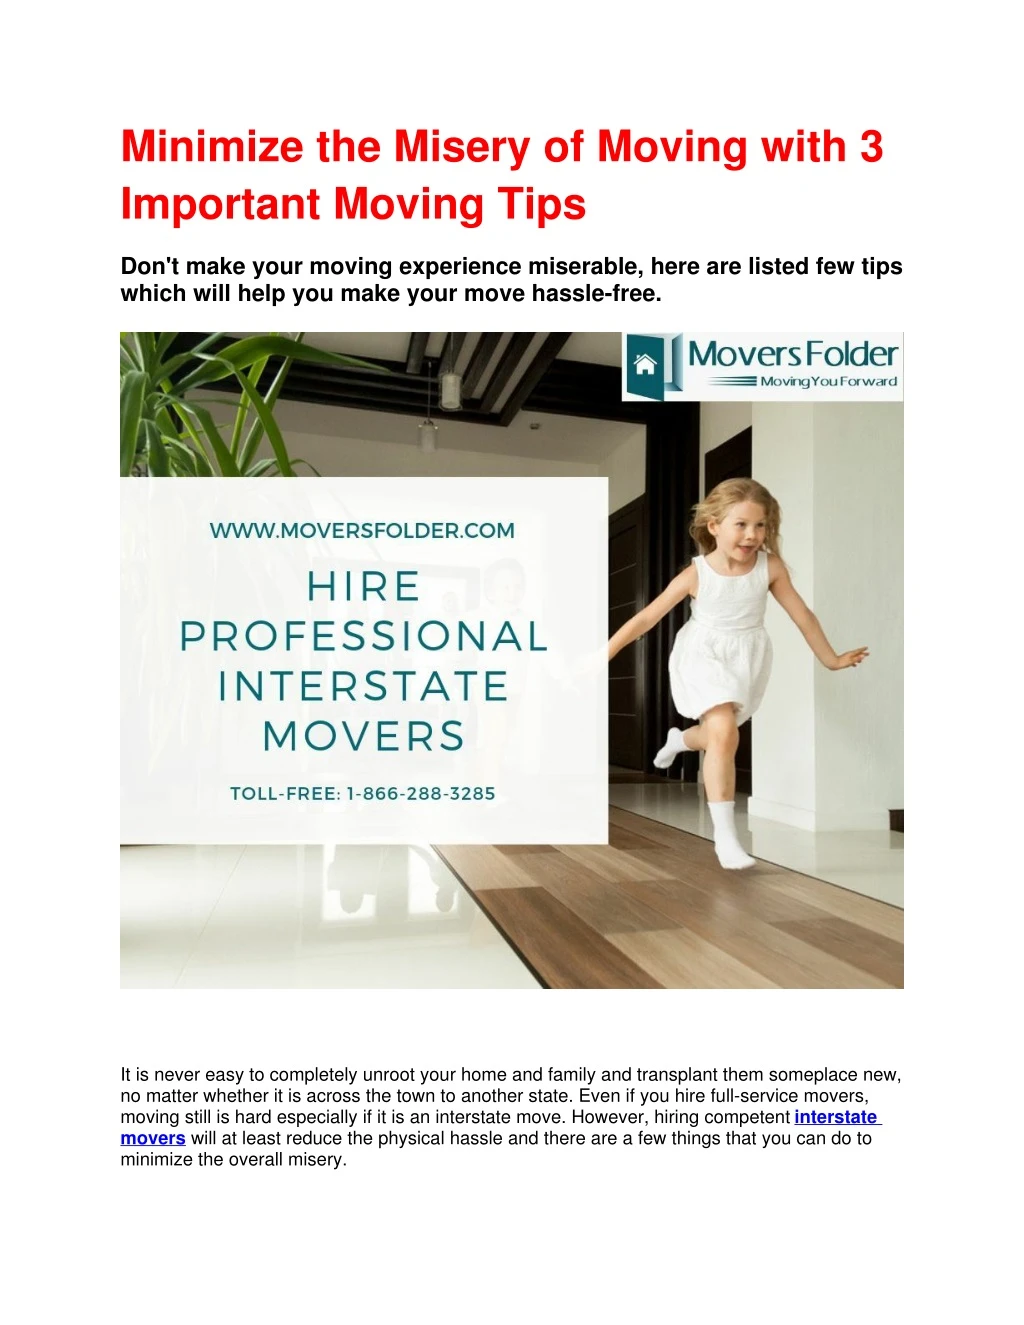 minimize the misery of moving with 3 important